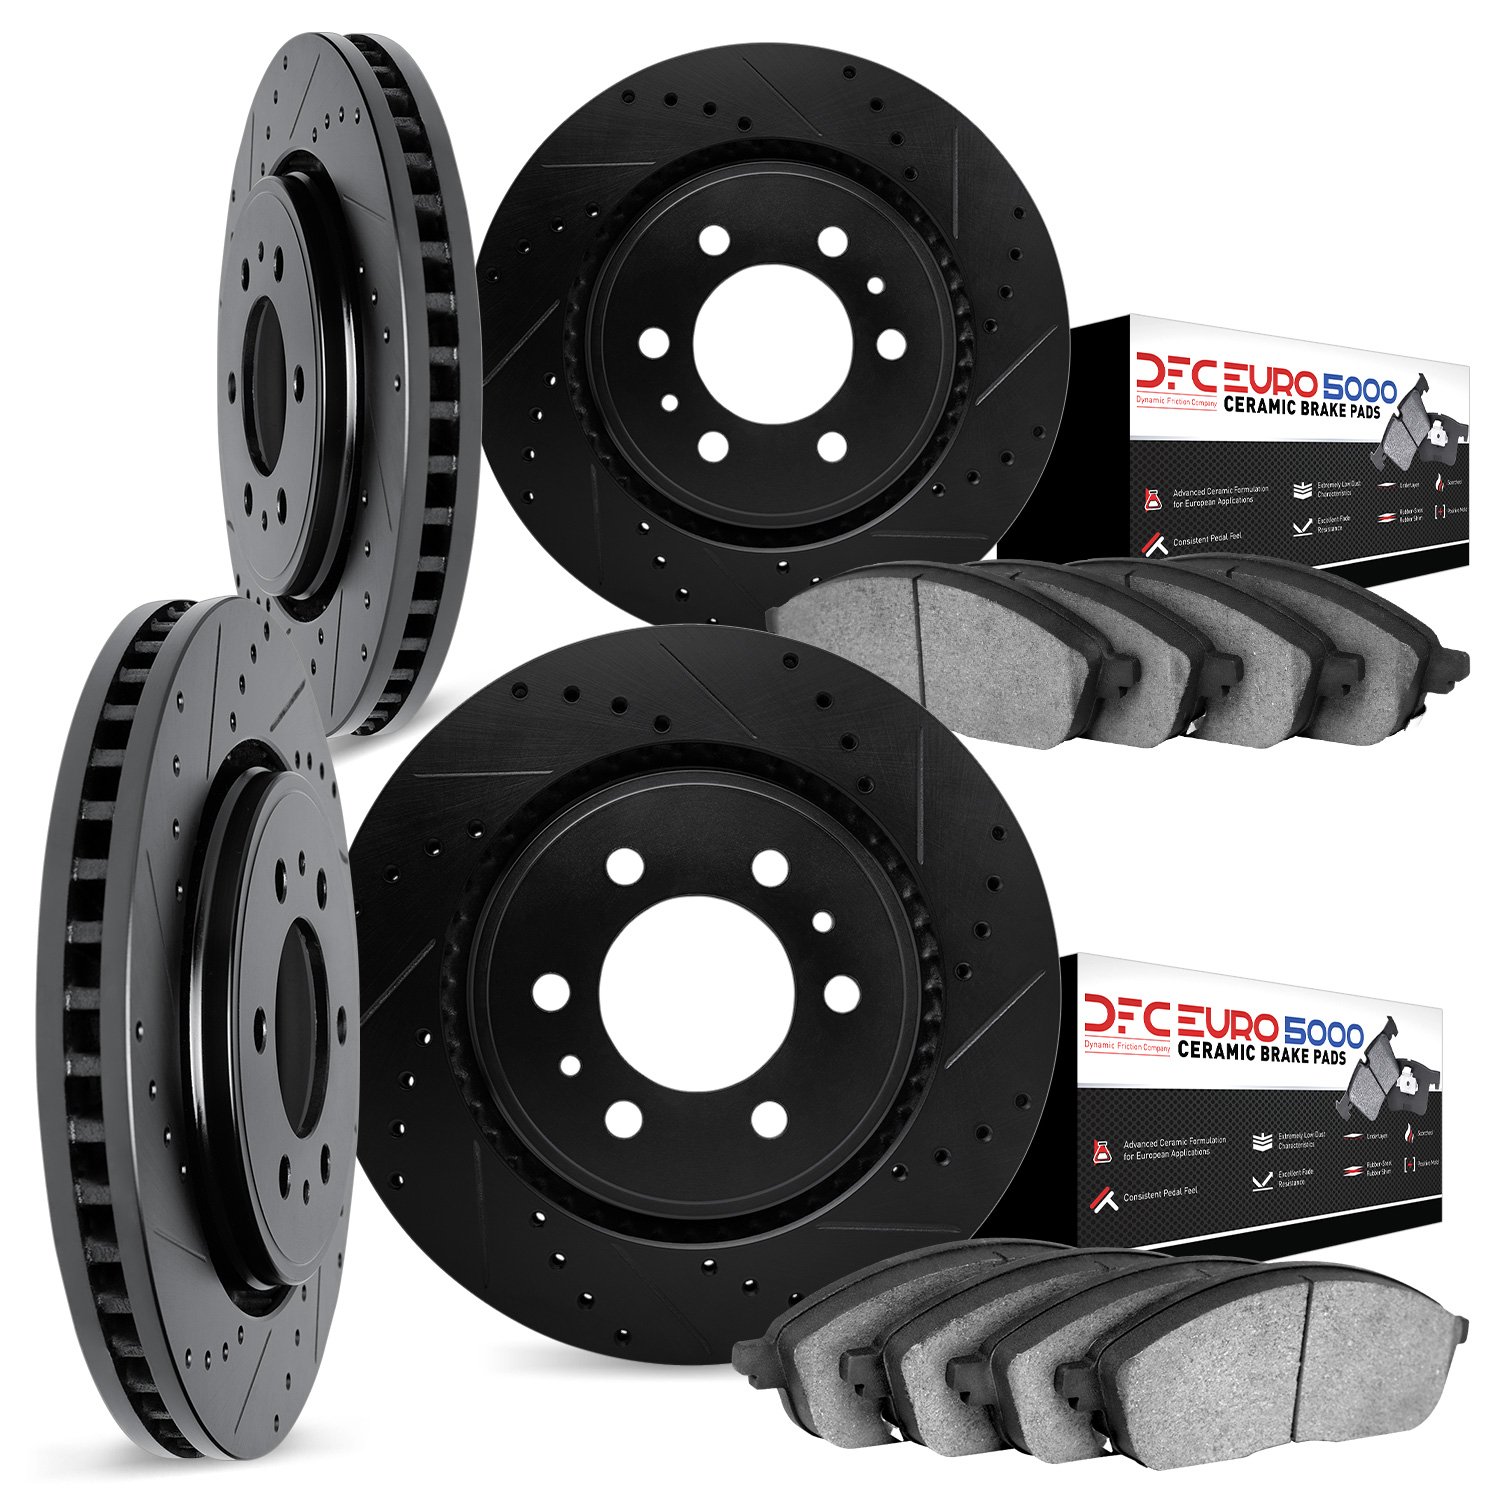 8604-48001 Drilled/Slotted Brake Rotors w/5000 Euro Ceramic Brake Pads Kit [Black], 2002-2005 GM, Position: Front and Rear